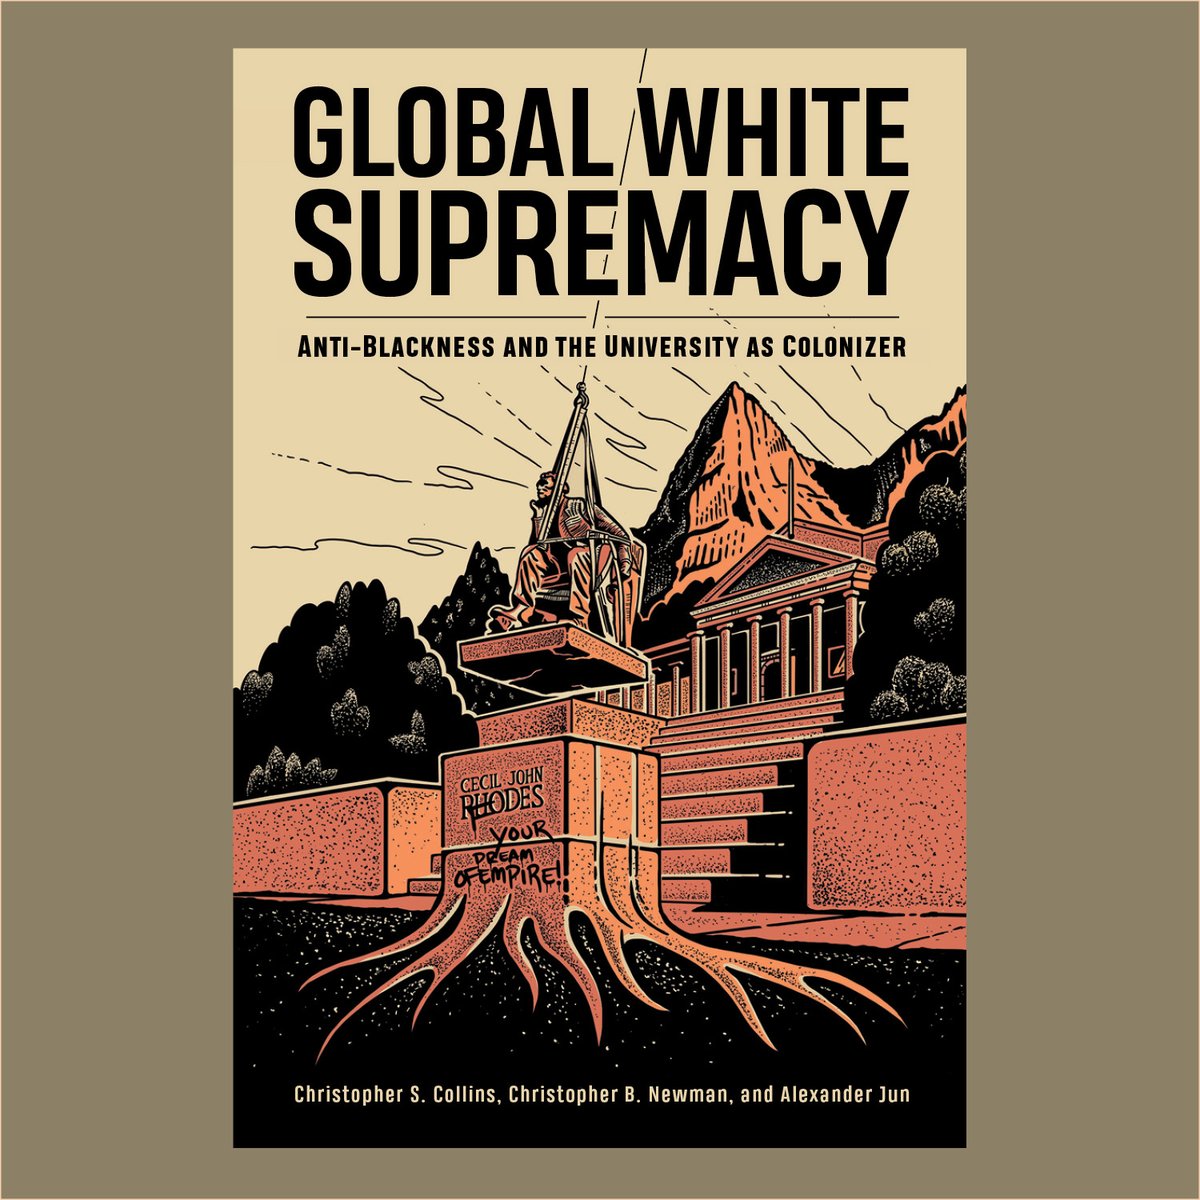 “Global White Supremacy: Anti-Blackness and the University as Colonizer”
by Christopher S. Collins, Christopher B. Newman, and Alexander Jun

rutgersuniversitypress.org/global-white-s…

#NewBookAnnouncement #RaceStudies #CulturalStudies